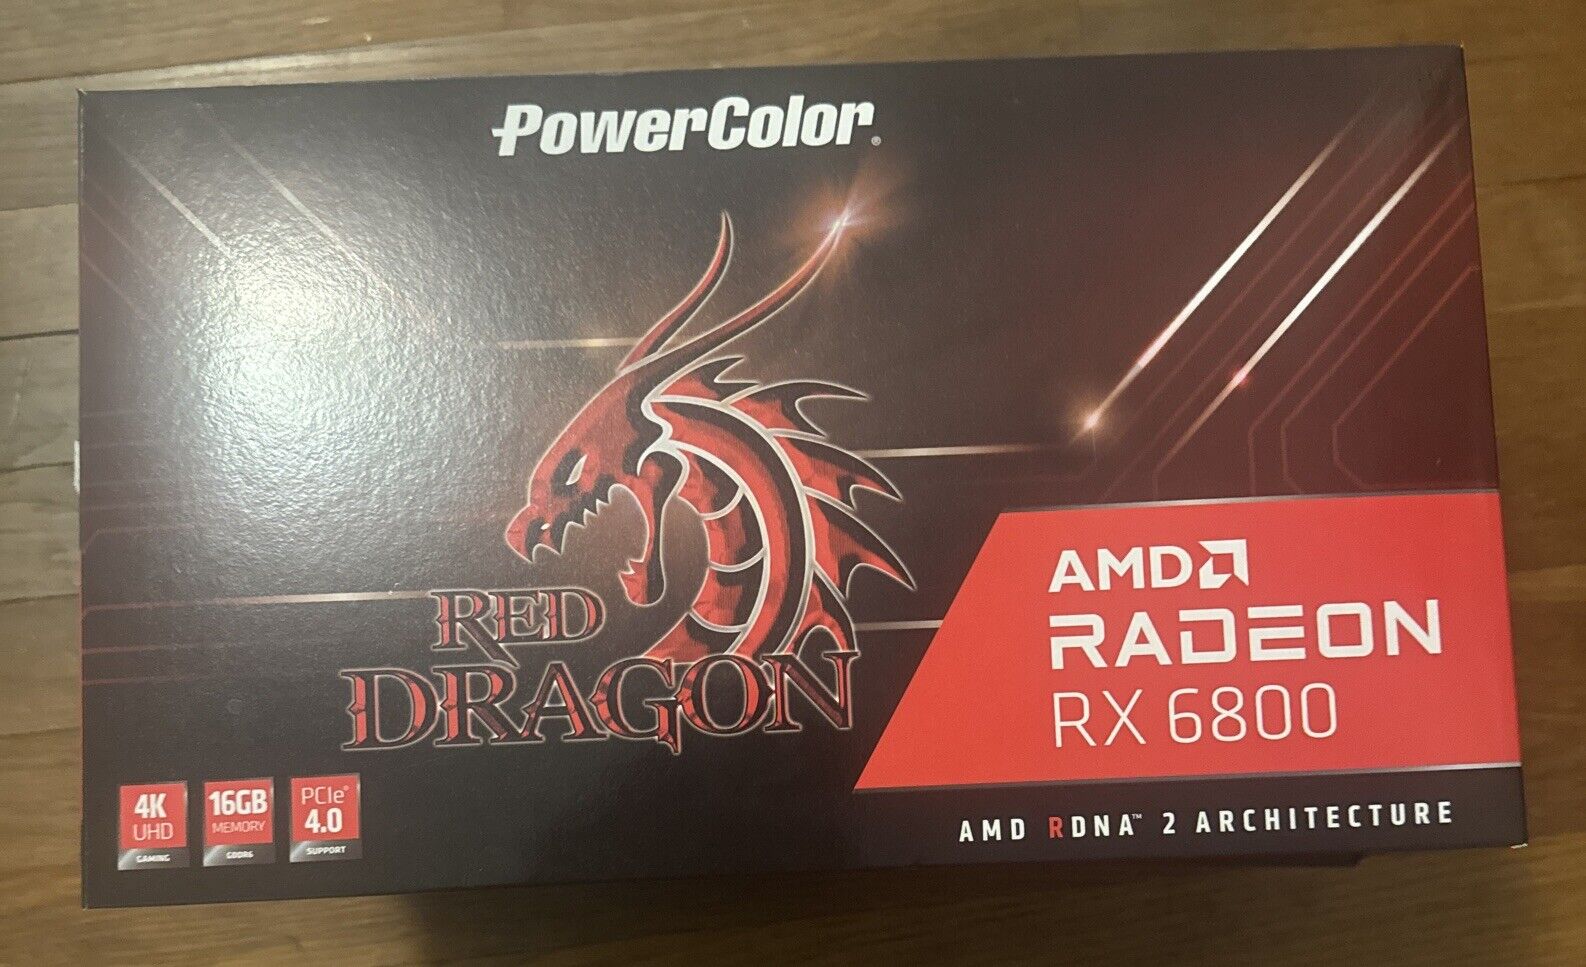 PowerColor AMD Radeon RX 6800 *BOX ONLY*